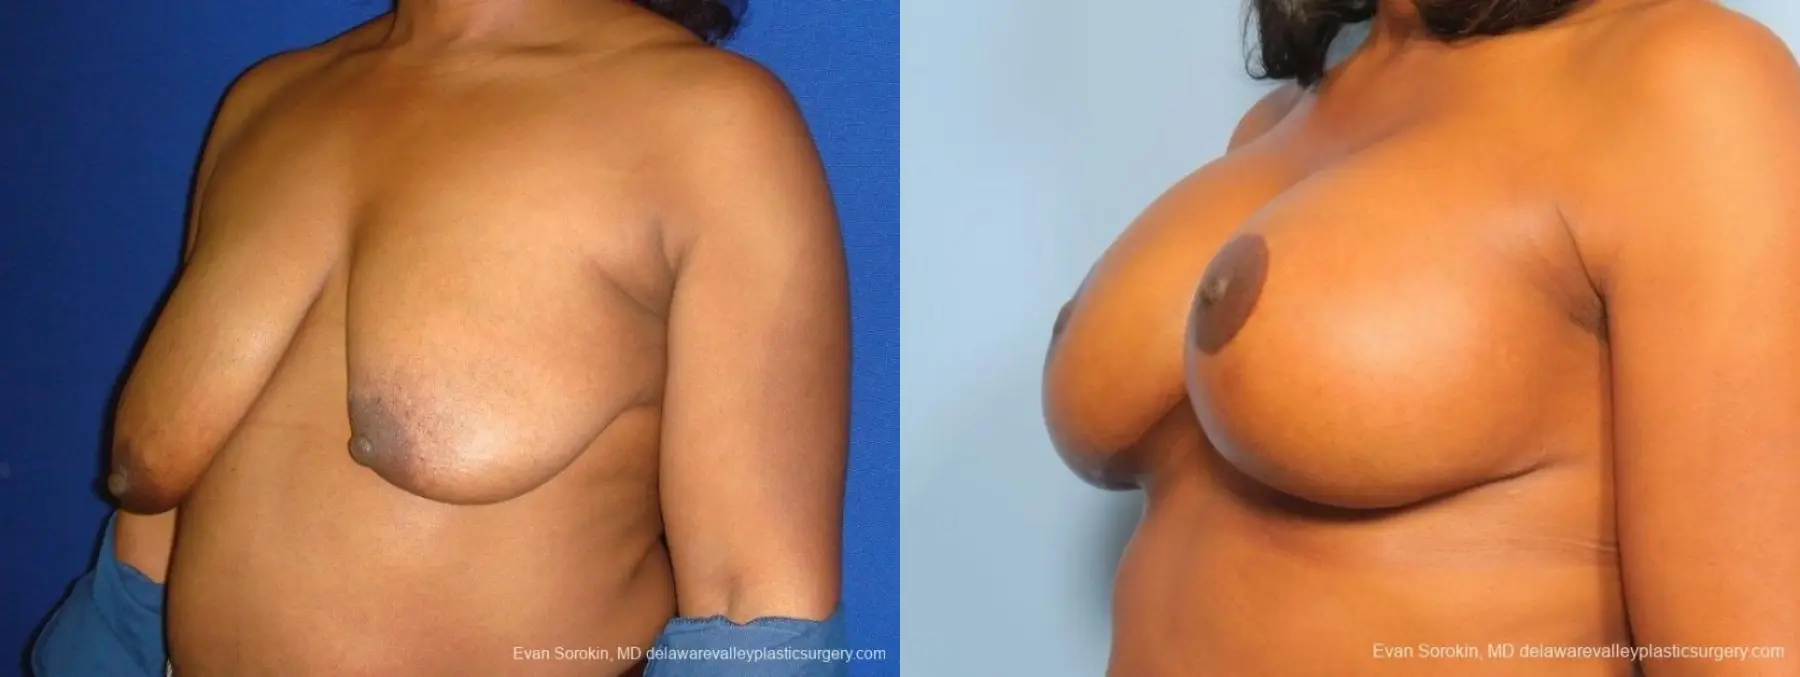 Philadelphia Breast Lift and Augmentation 8684 - Before and After 3